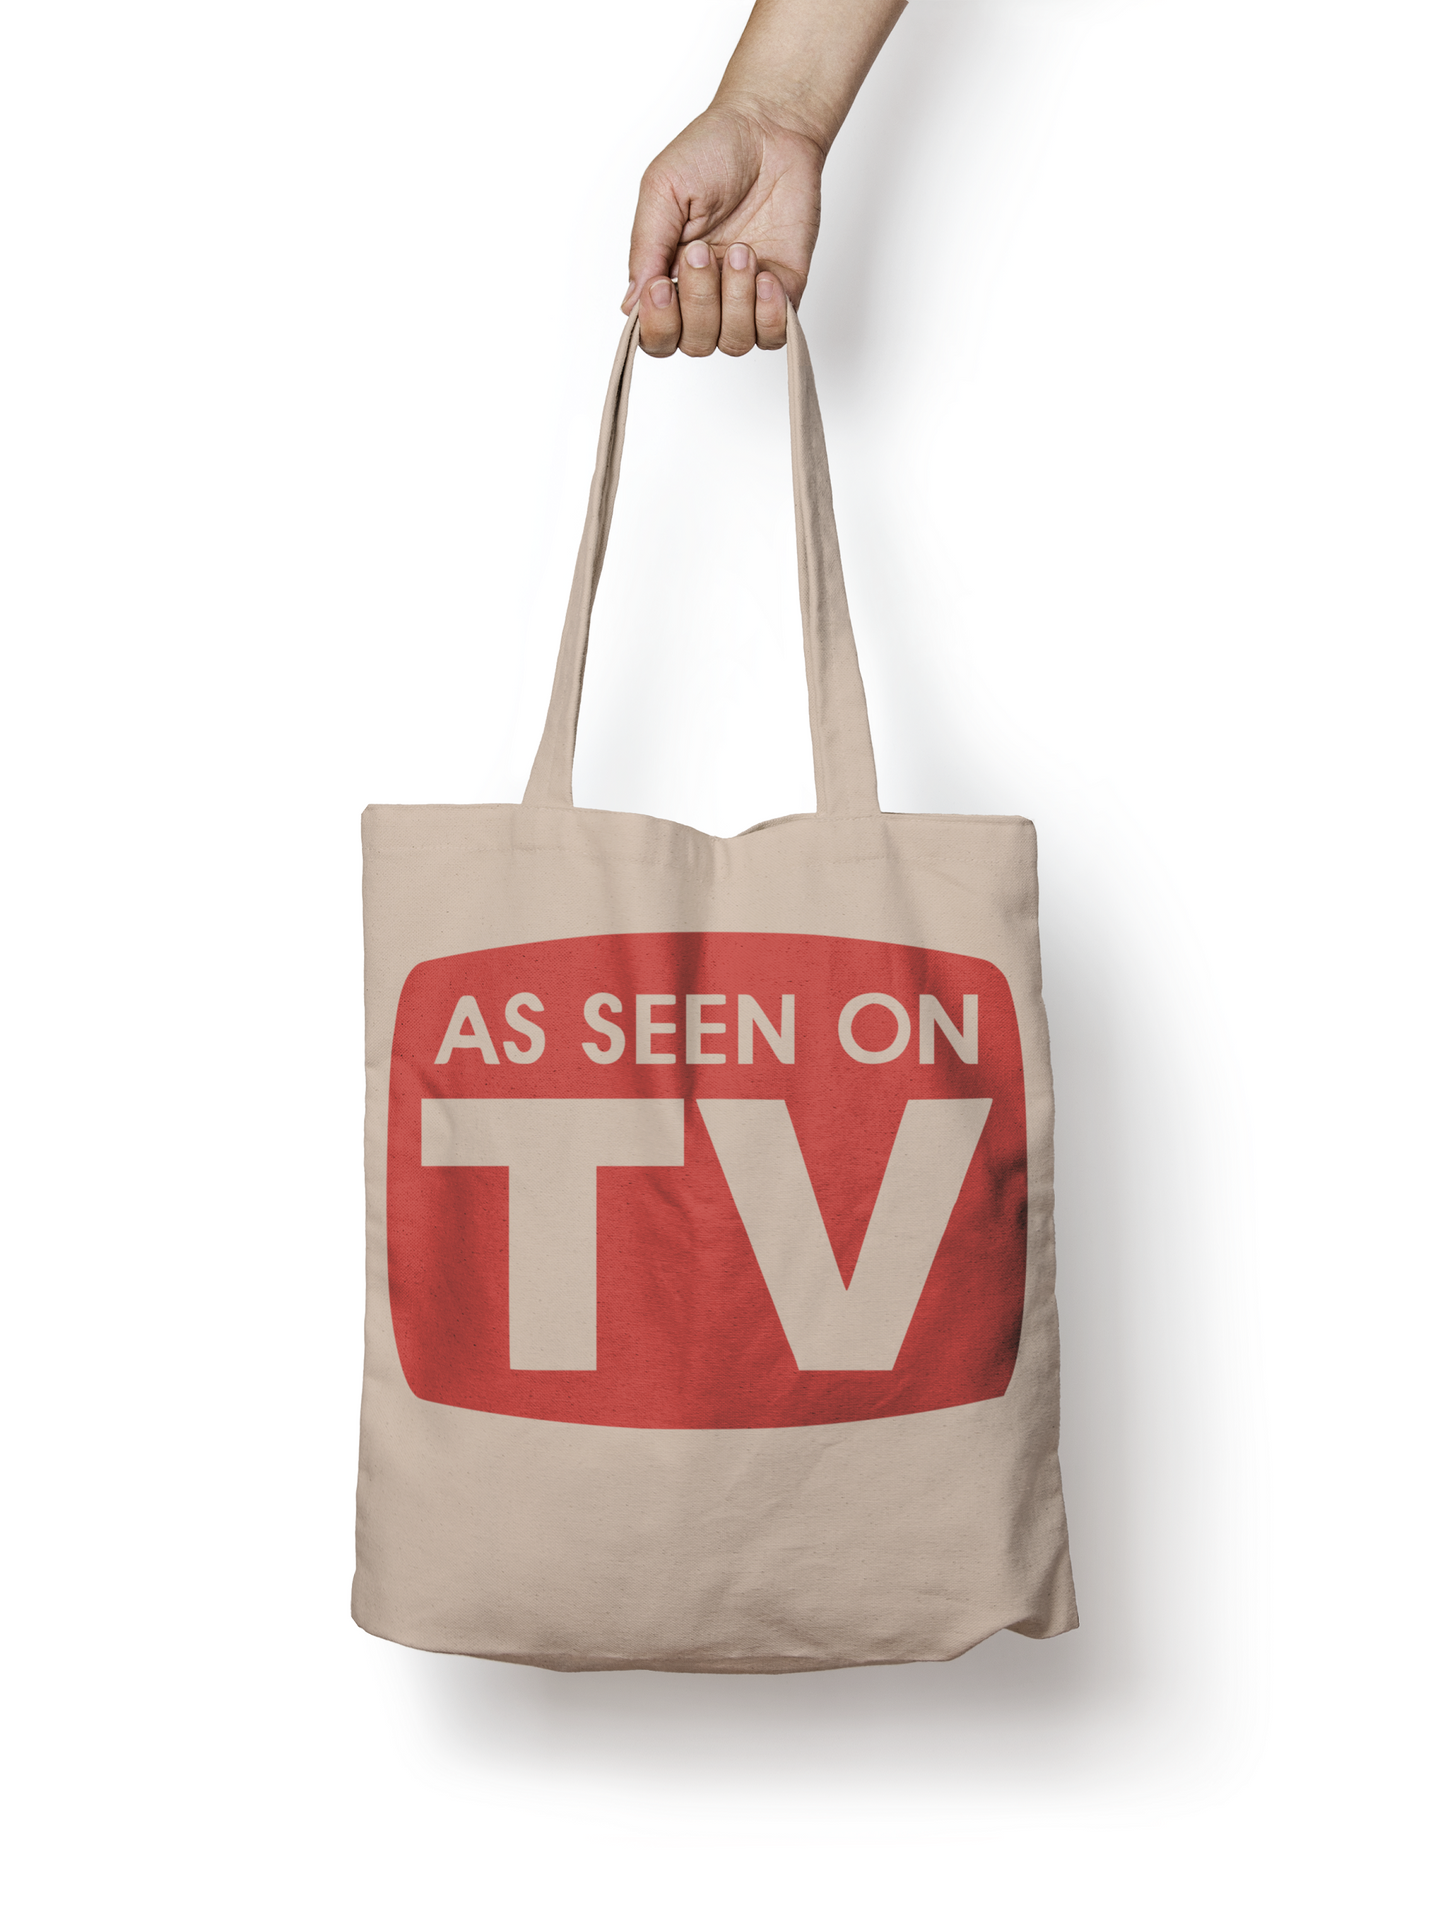 As Seen on TV Tote, Grocery Tote, Book Tote, Office Tote, 100% Cotton Fun Tote